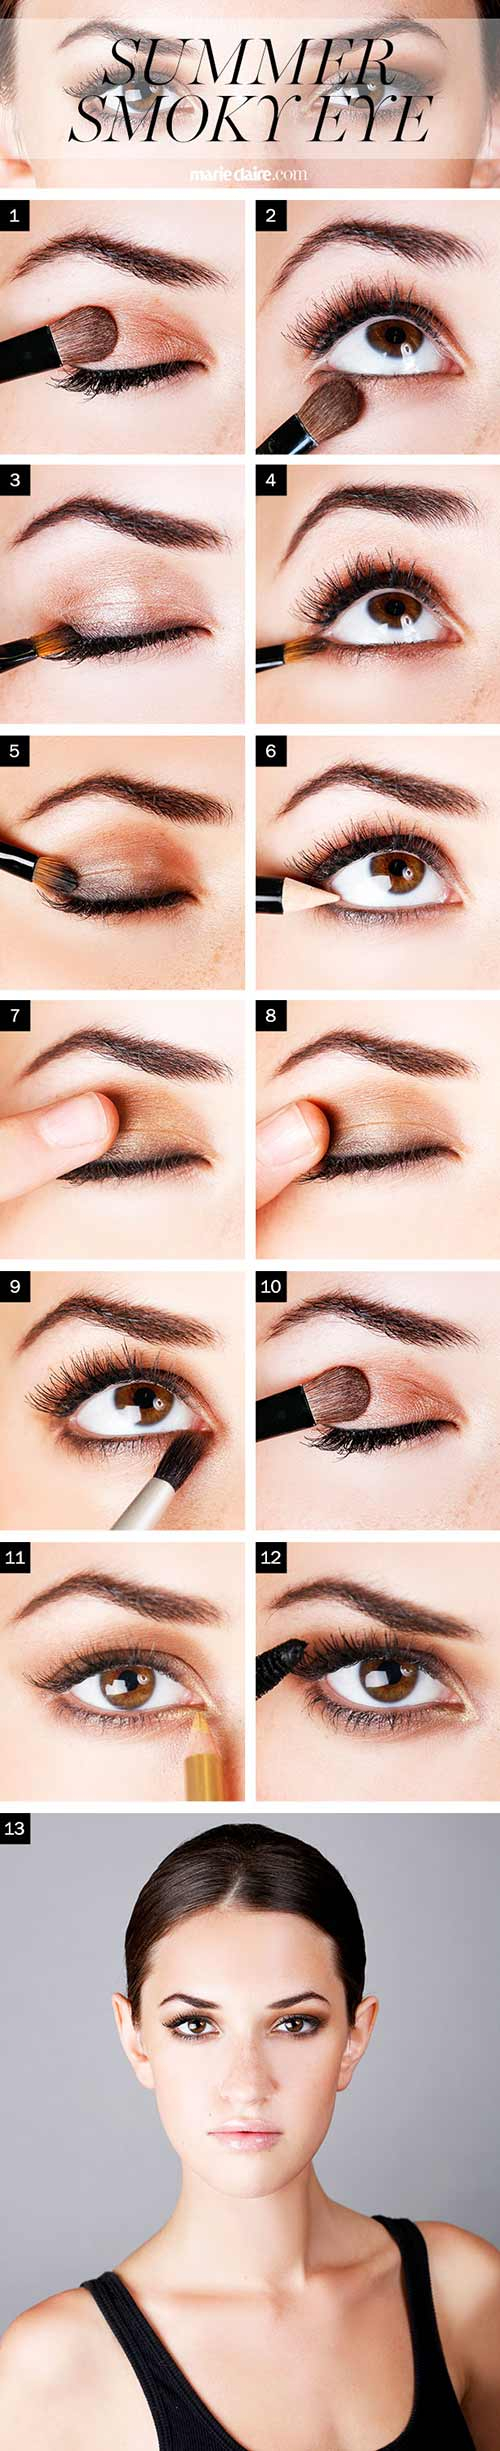 Simple Brown Eye Makeup Tutorial How To Do Smokey Eye Makeup Top 10 Tutorial Pictures For 2019